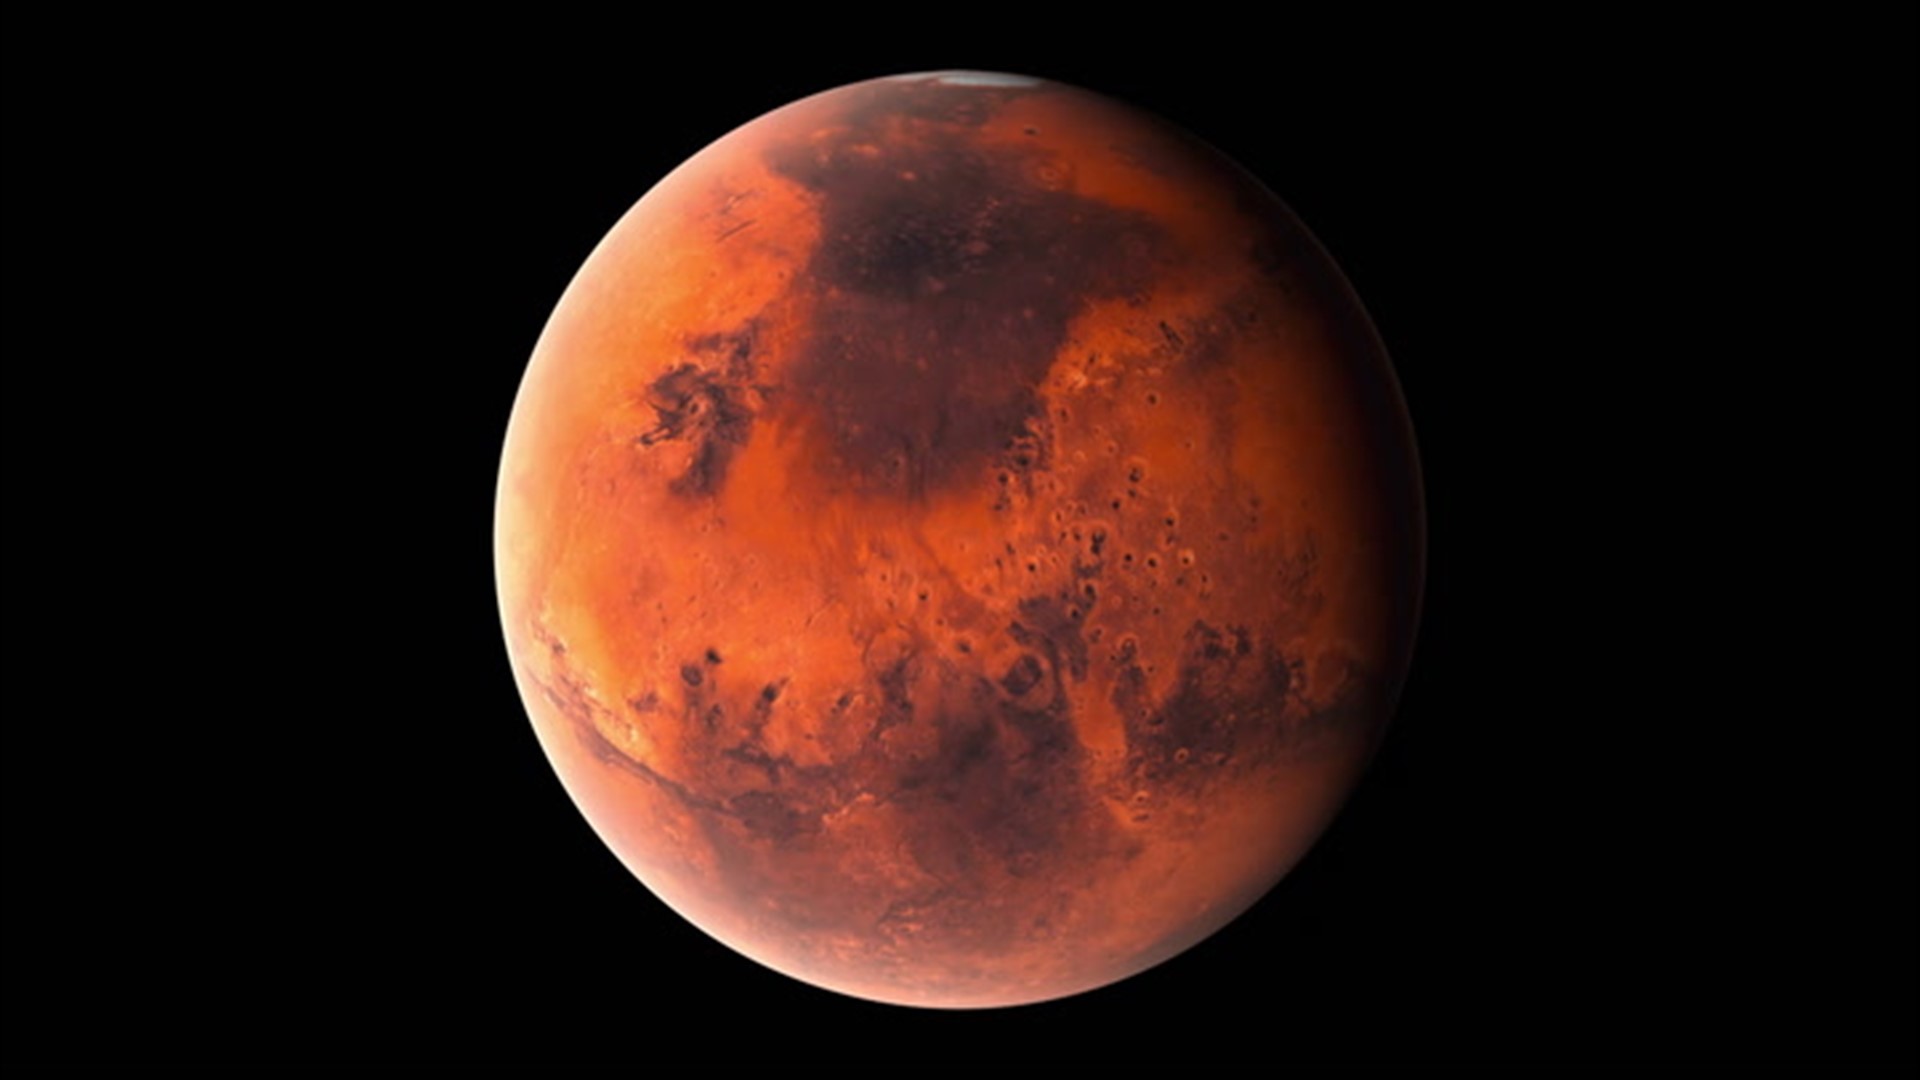 Stargazers, catch Mars at its closest approach since 2018 on Oct. 6! The Red Planet will dominate the night sky and won't be this close again until 2035.